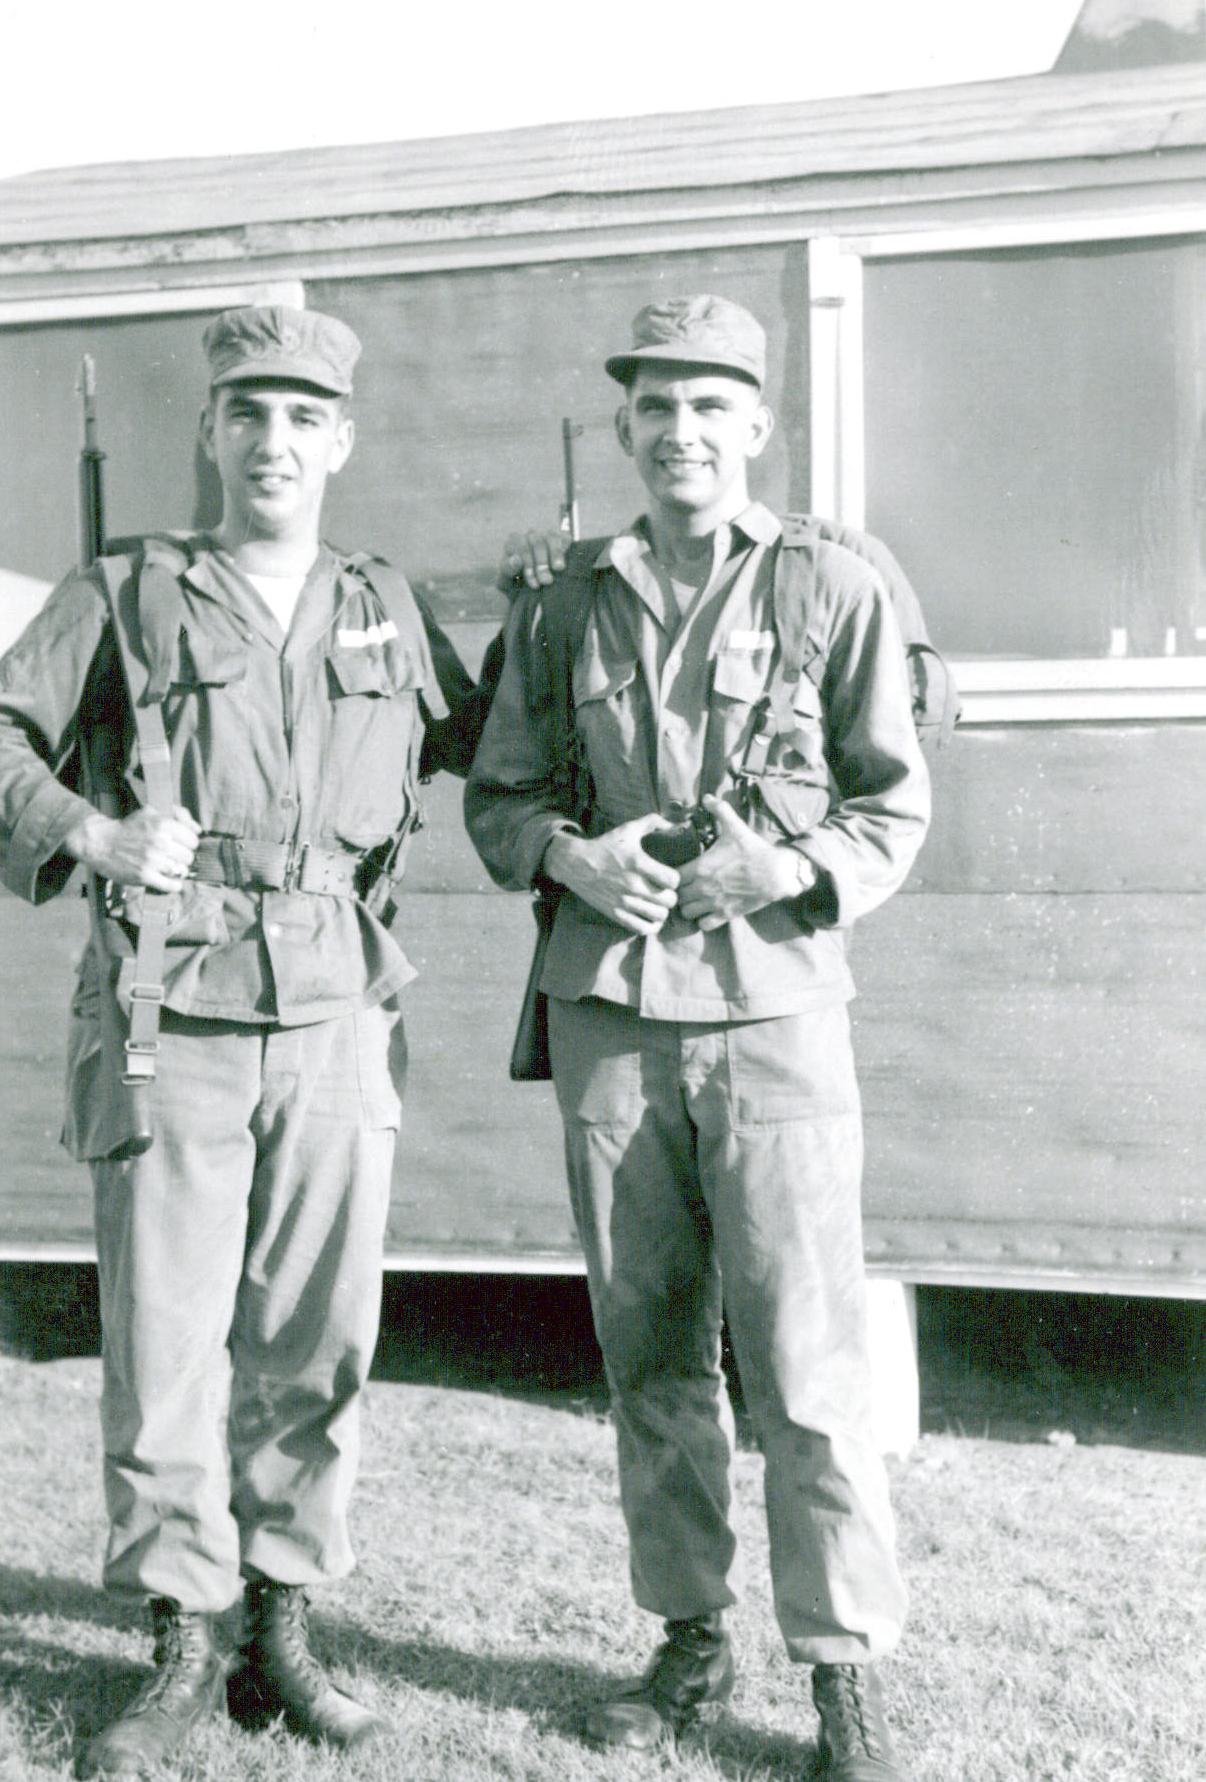 Alan served for two years in the U.S. Army during the Korean War. (Featured above Left)